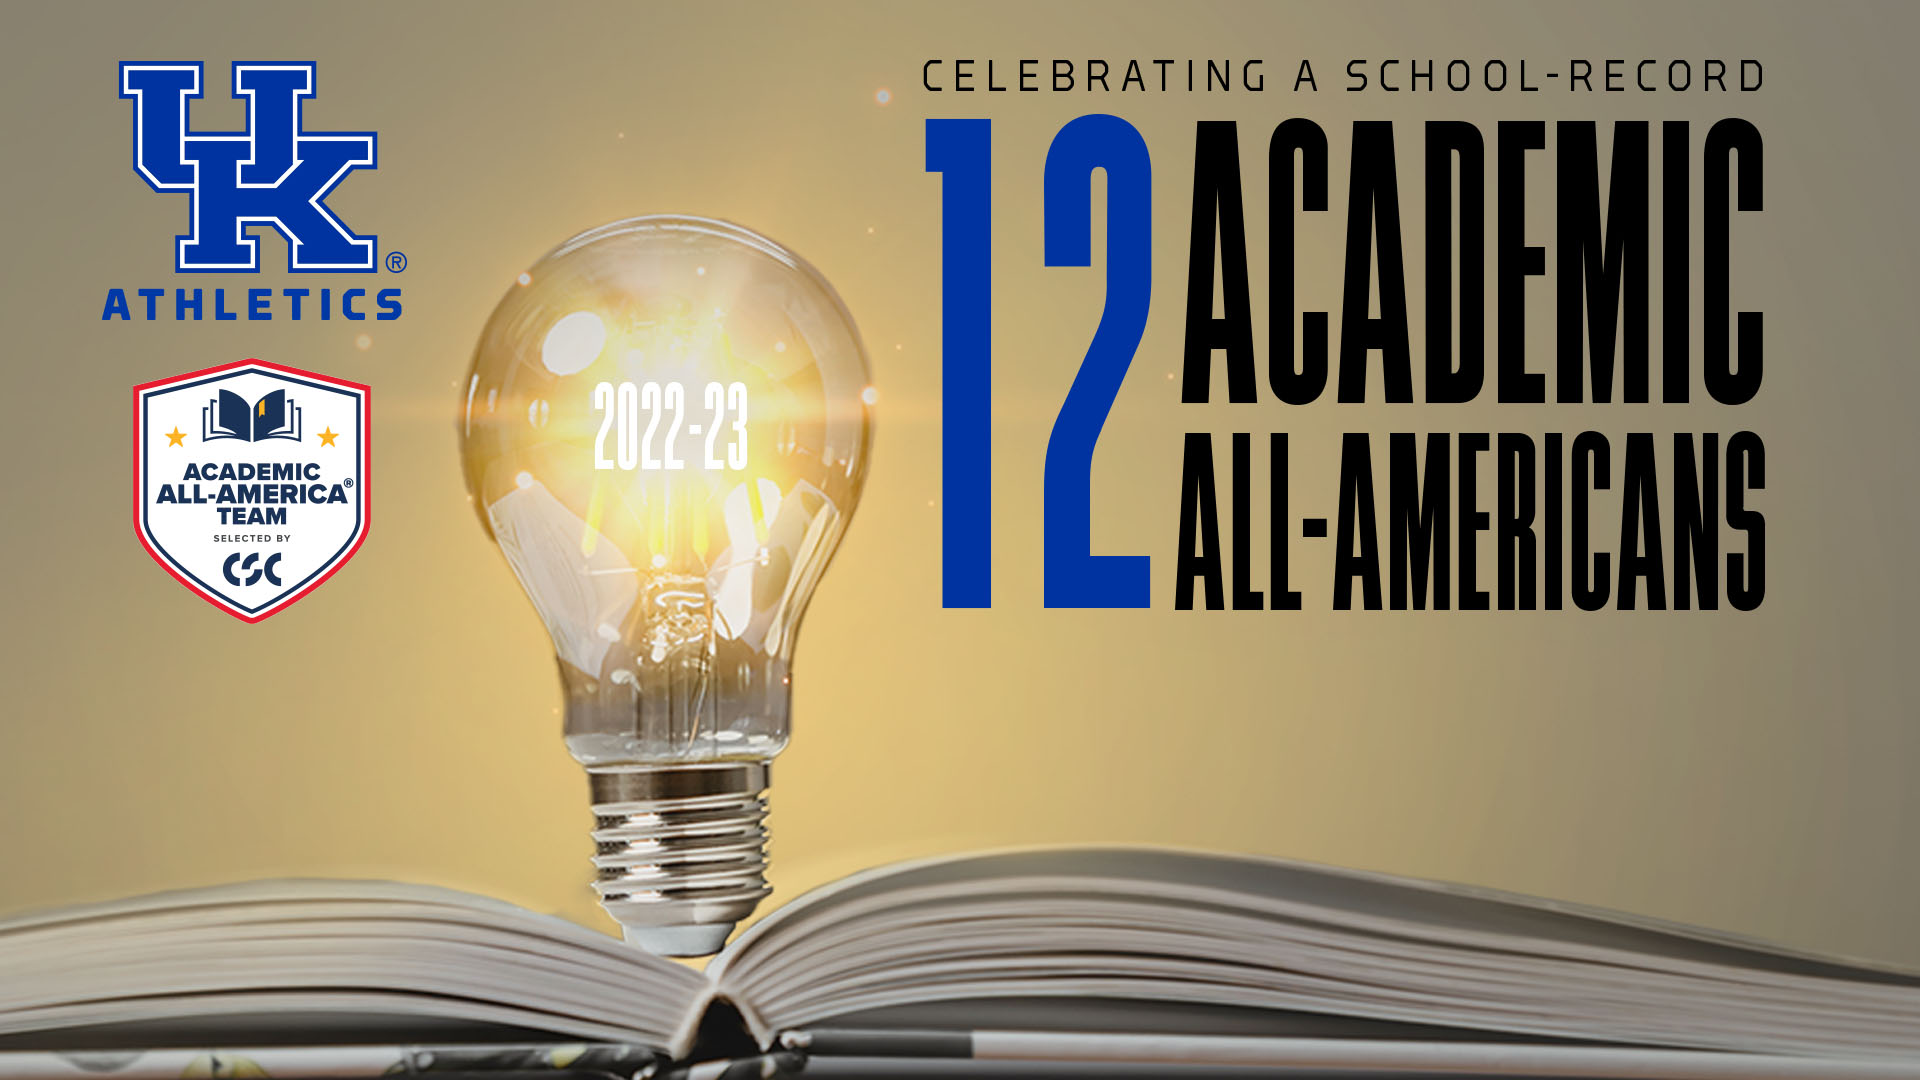 UK Athletics Posts School-Record 12 Academic All-Americans in 2022-23